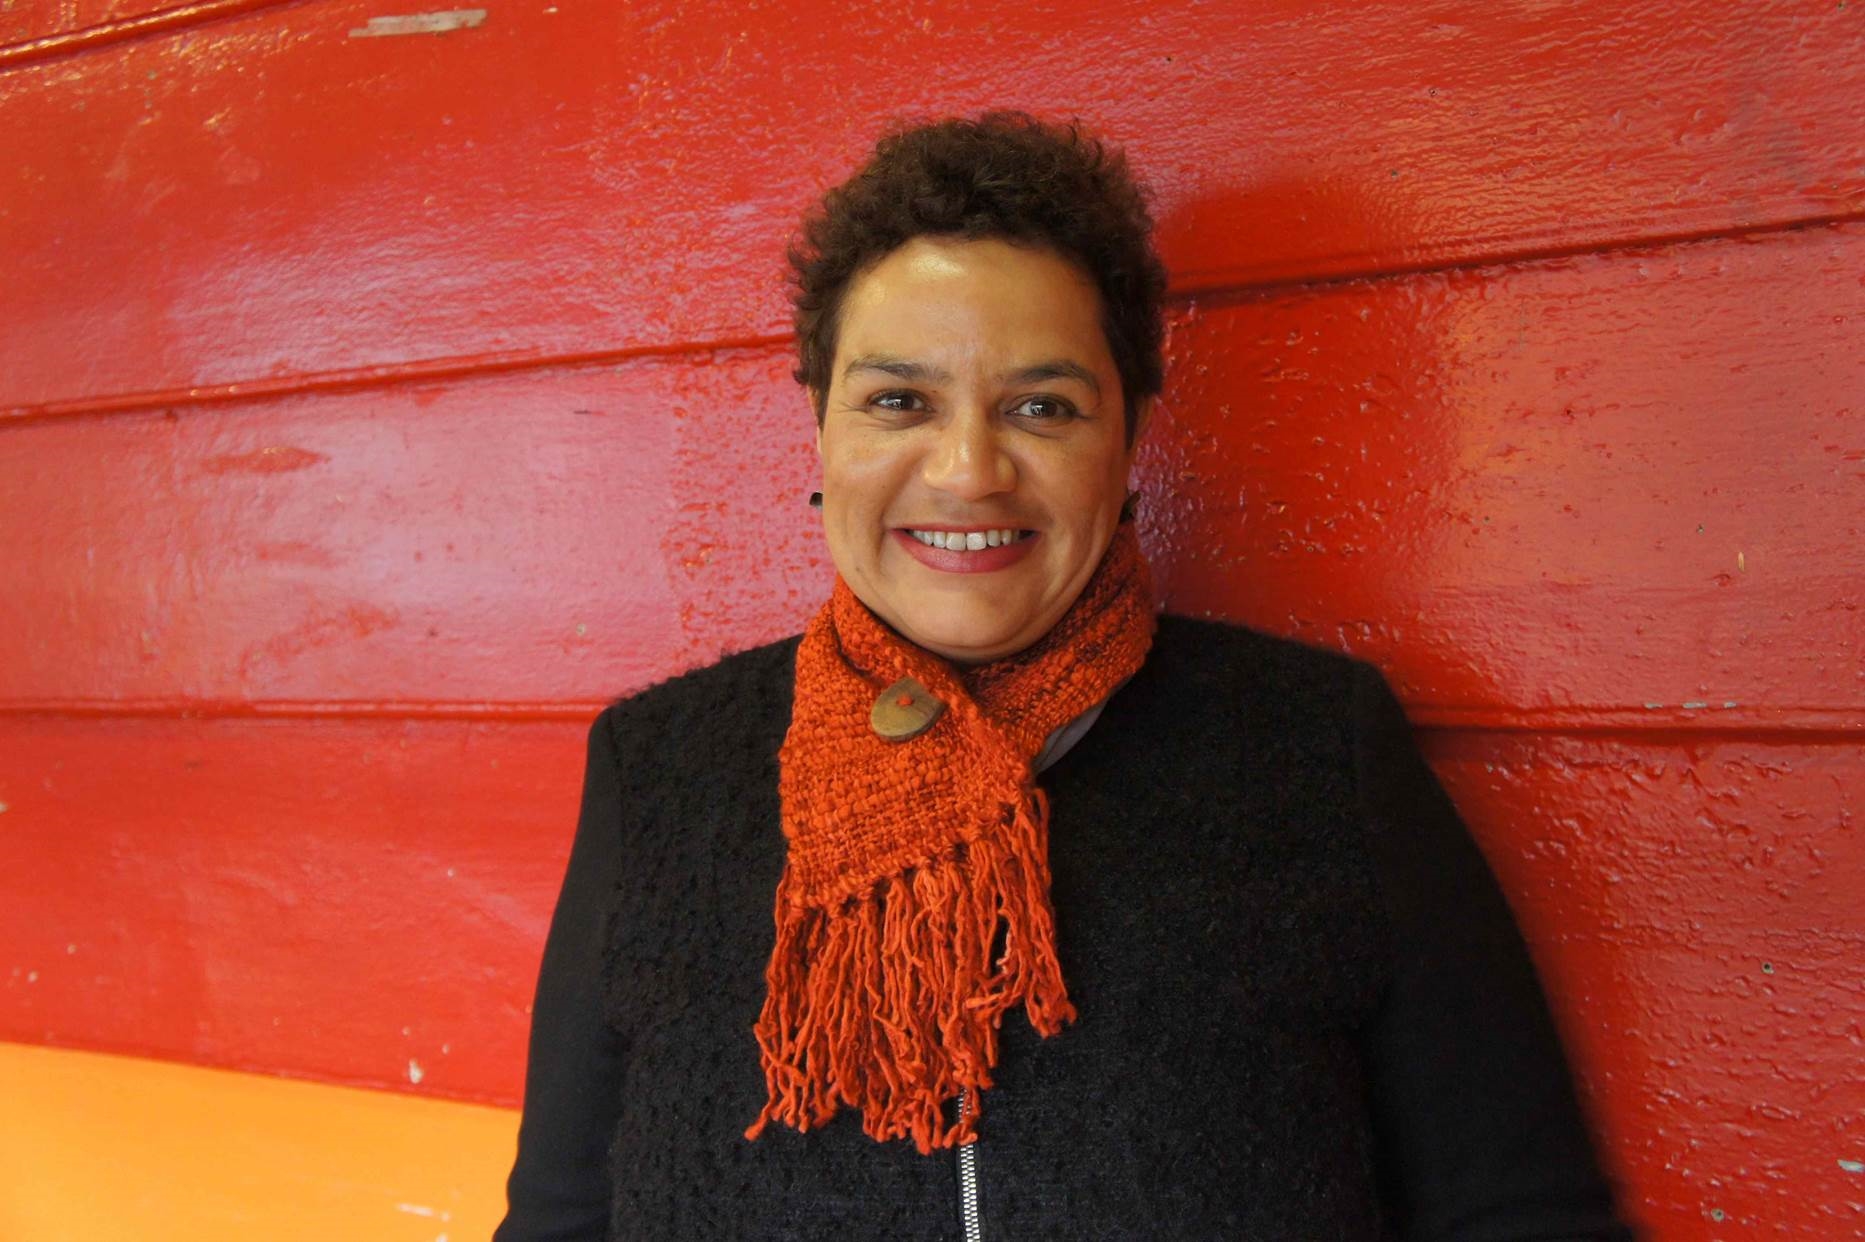 A photograph of Jackie Kay, a woman of colour with short dark hair, standing against a red wall.